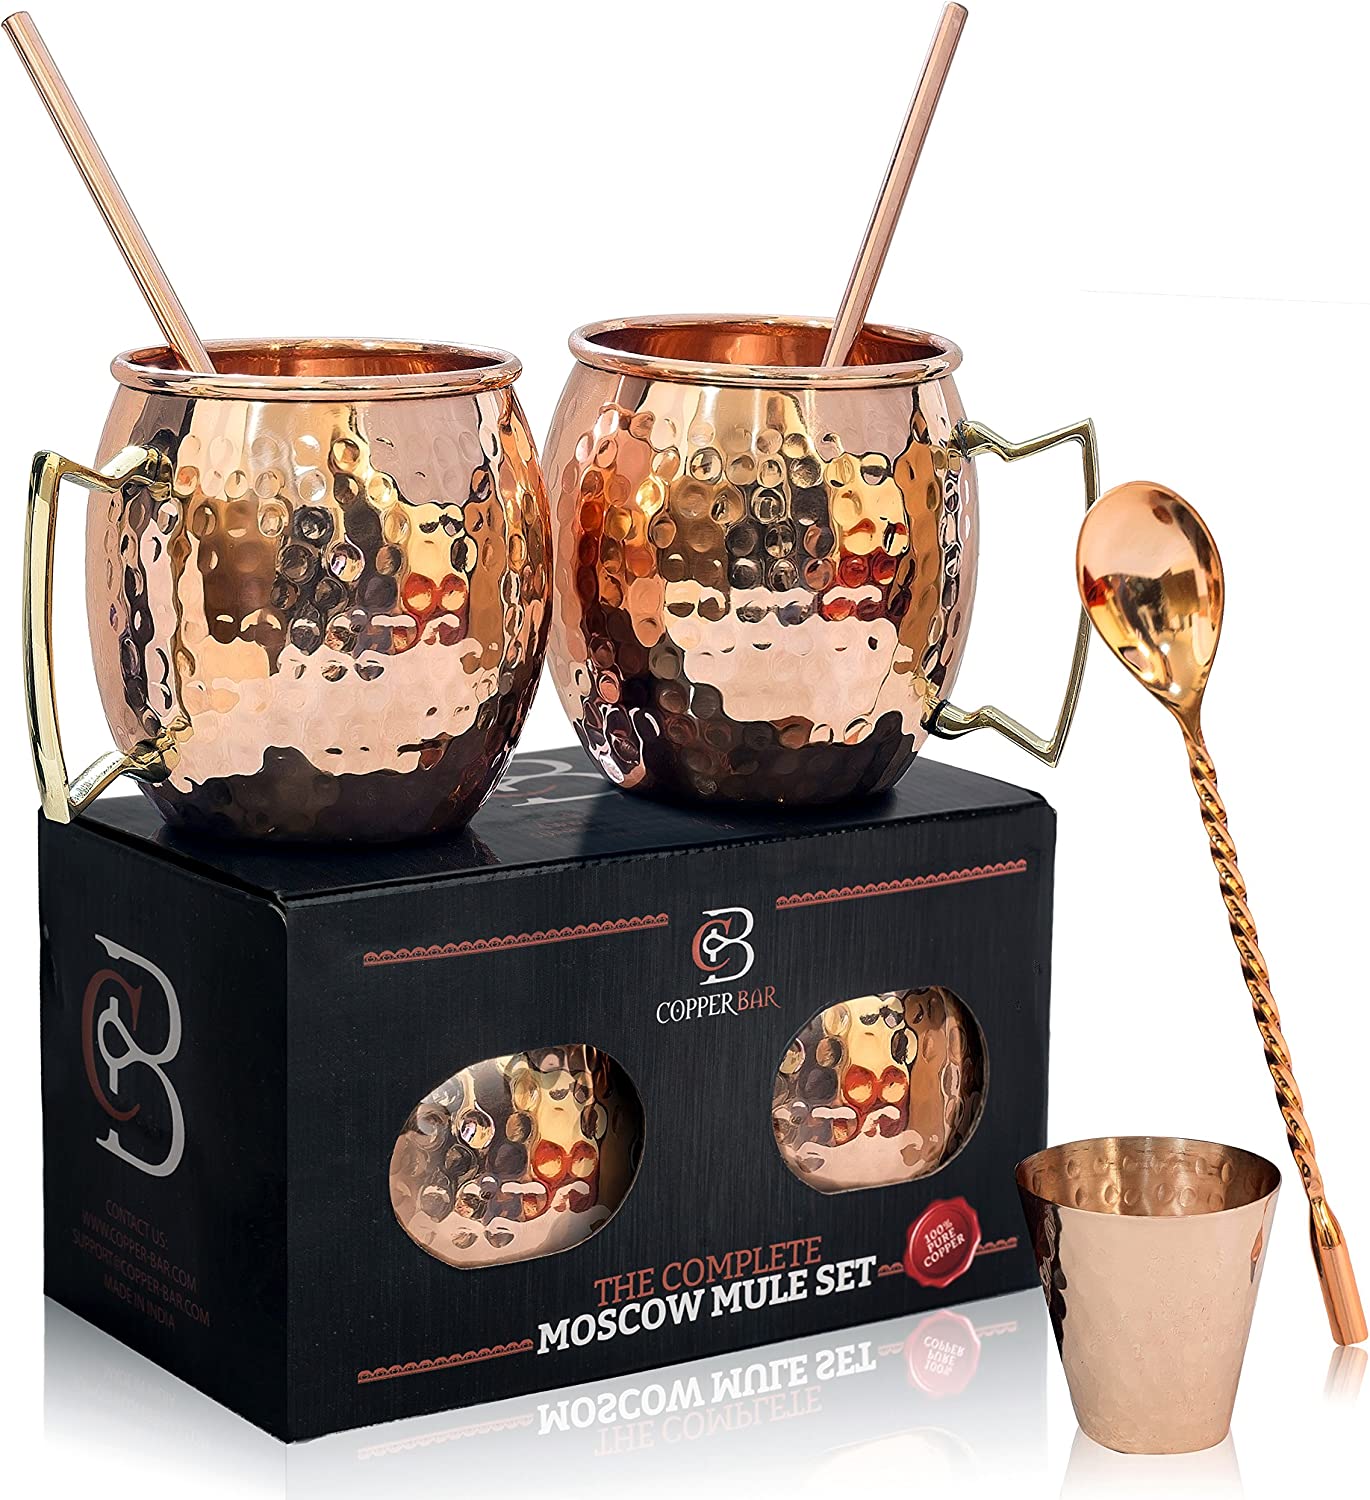 Moscow Mule Copper Mugs - Set of 2 - 100% HANDCRAFTED Pure Solid Copper Mugs - 16 Oz, Gift Set With Cocktail Copper Straws, Copper Shot Glass & Copper Stirrer by Copper-Bar